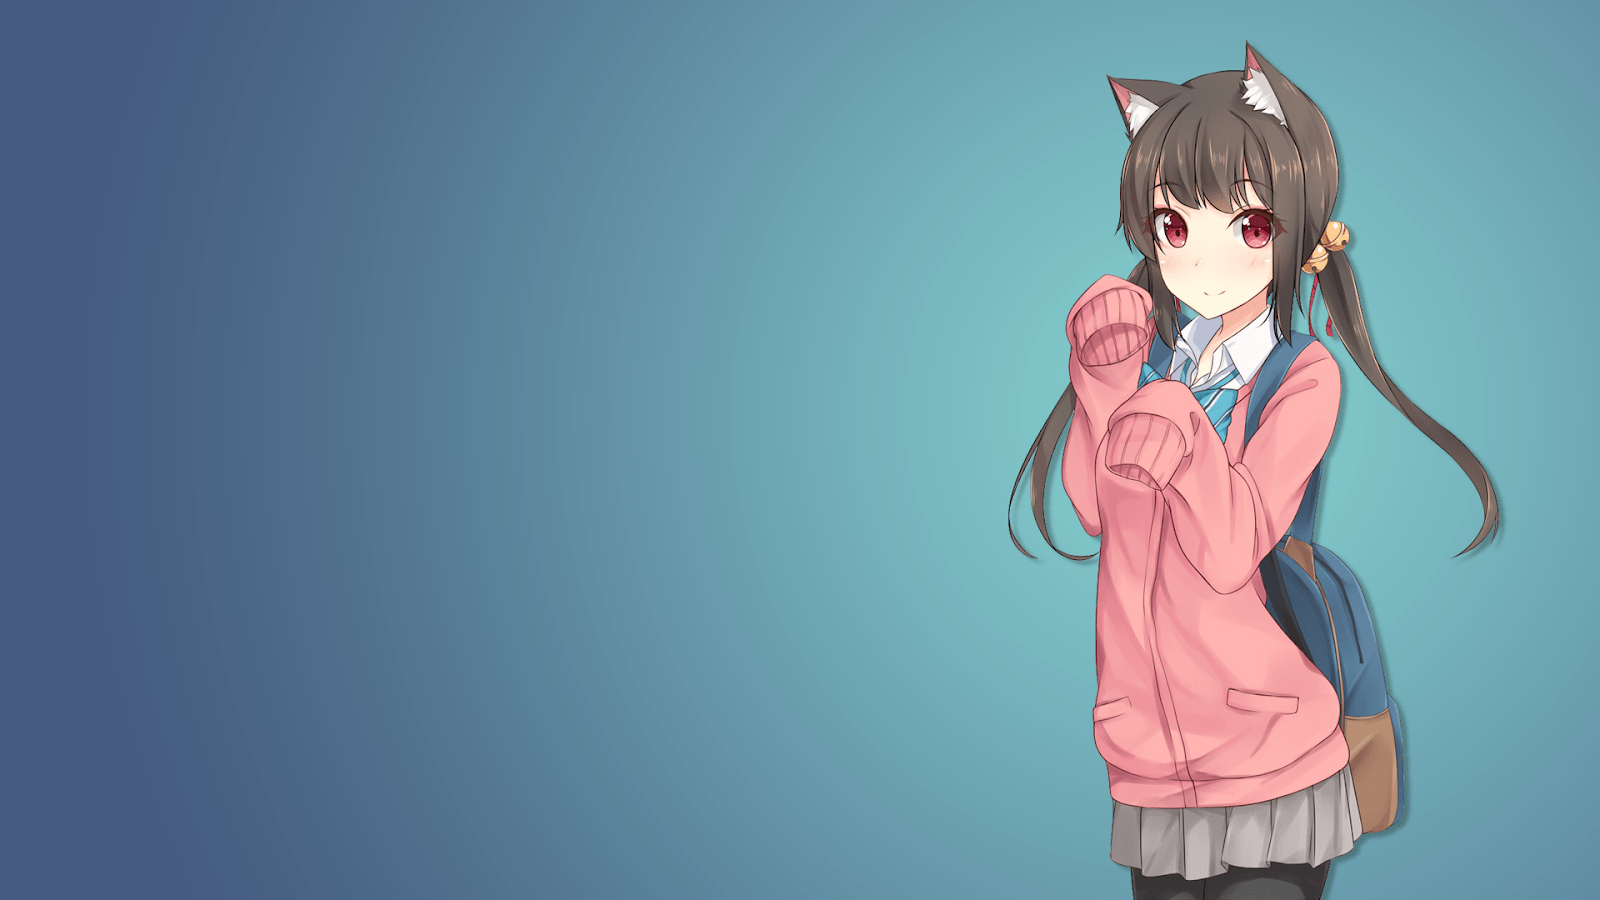 1080p HD Cat Girl Wallpaper High Quality Desktop, iphone and android